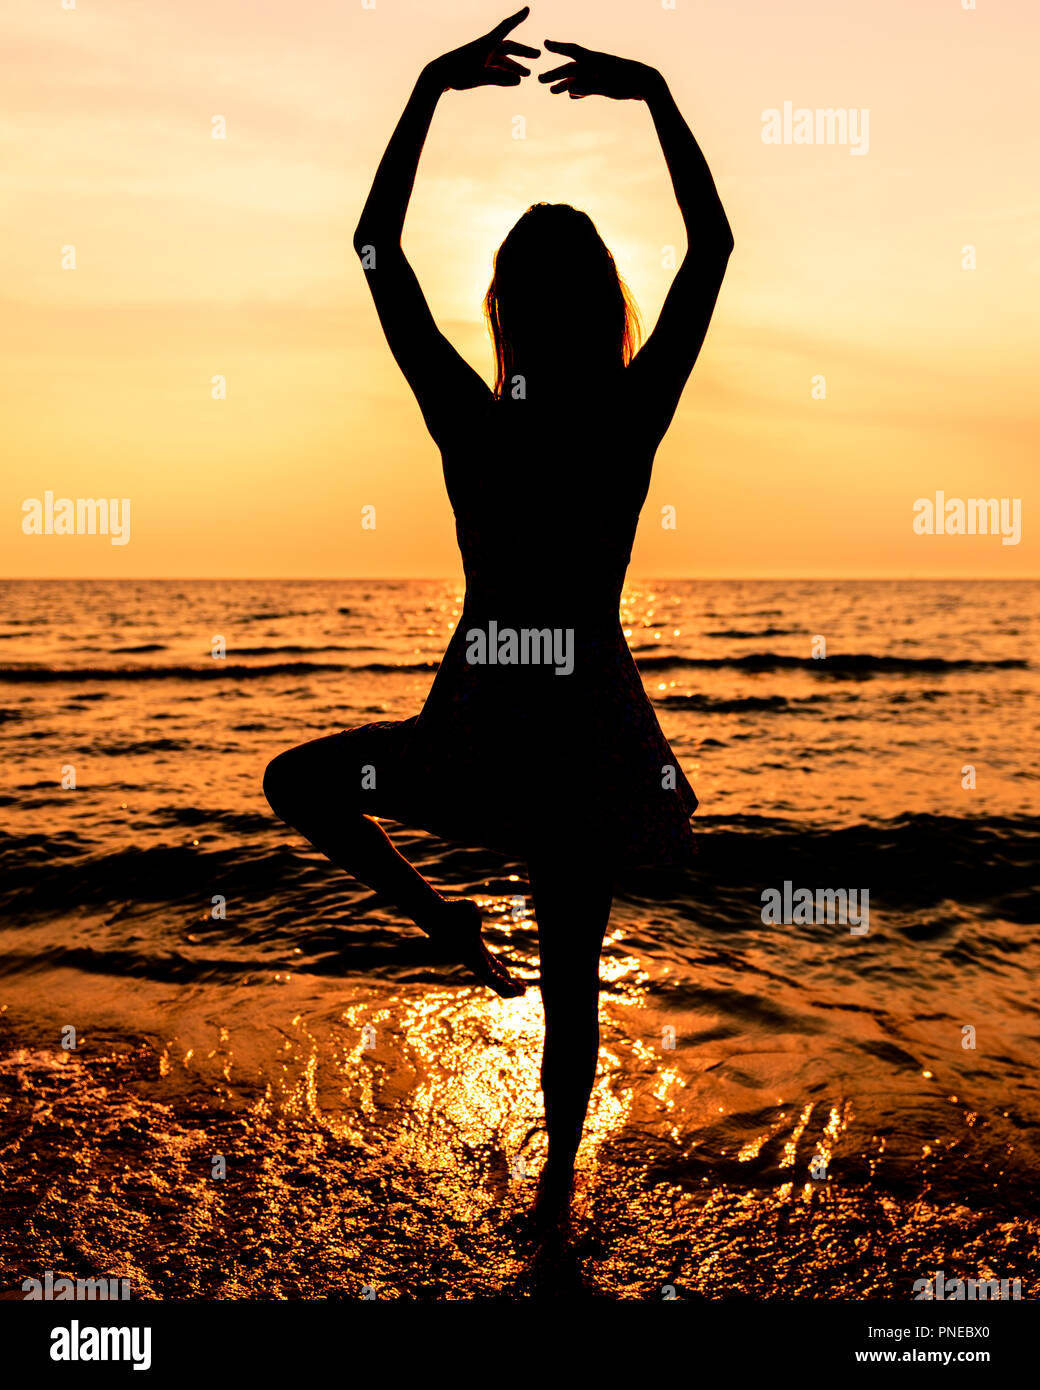 Teen Girl In A Dress With Long Hair At The Beach In Silhouette During Sunset In A Ballet Pose Stock Photo